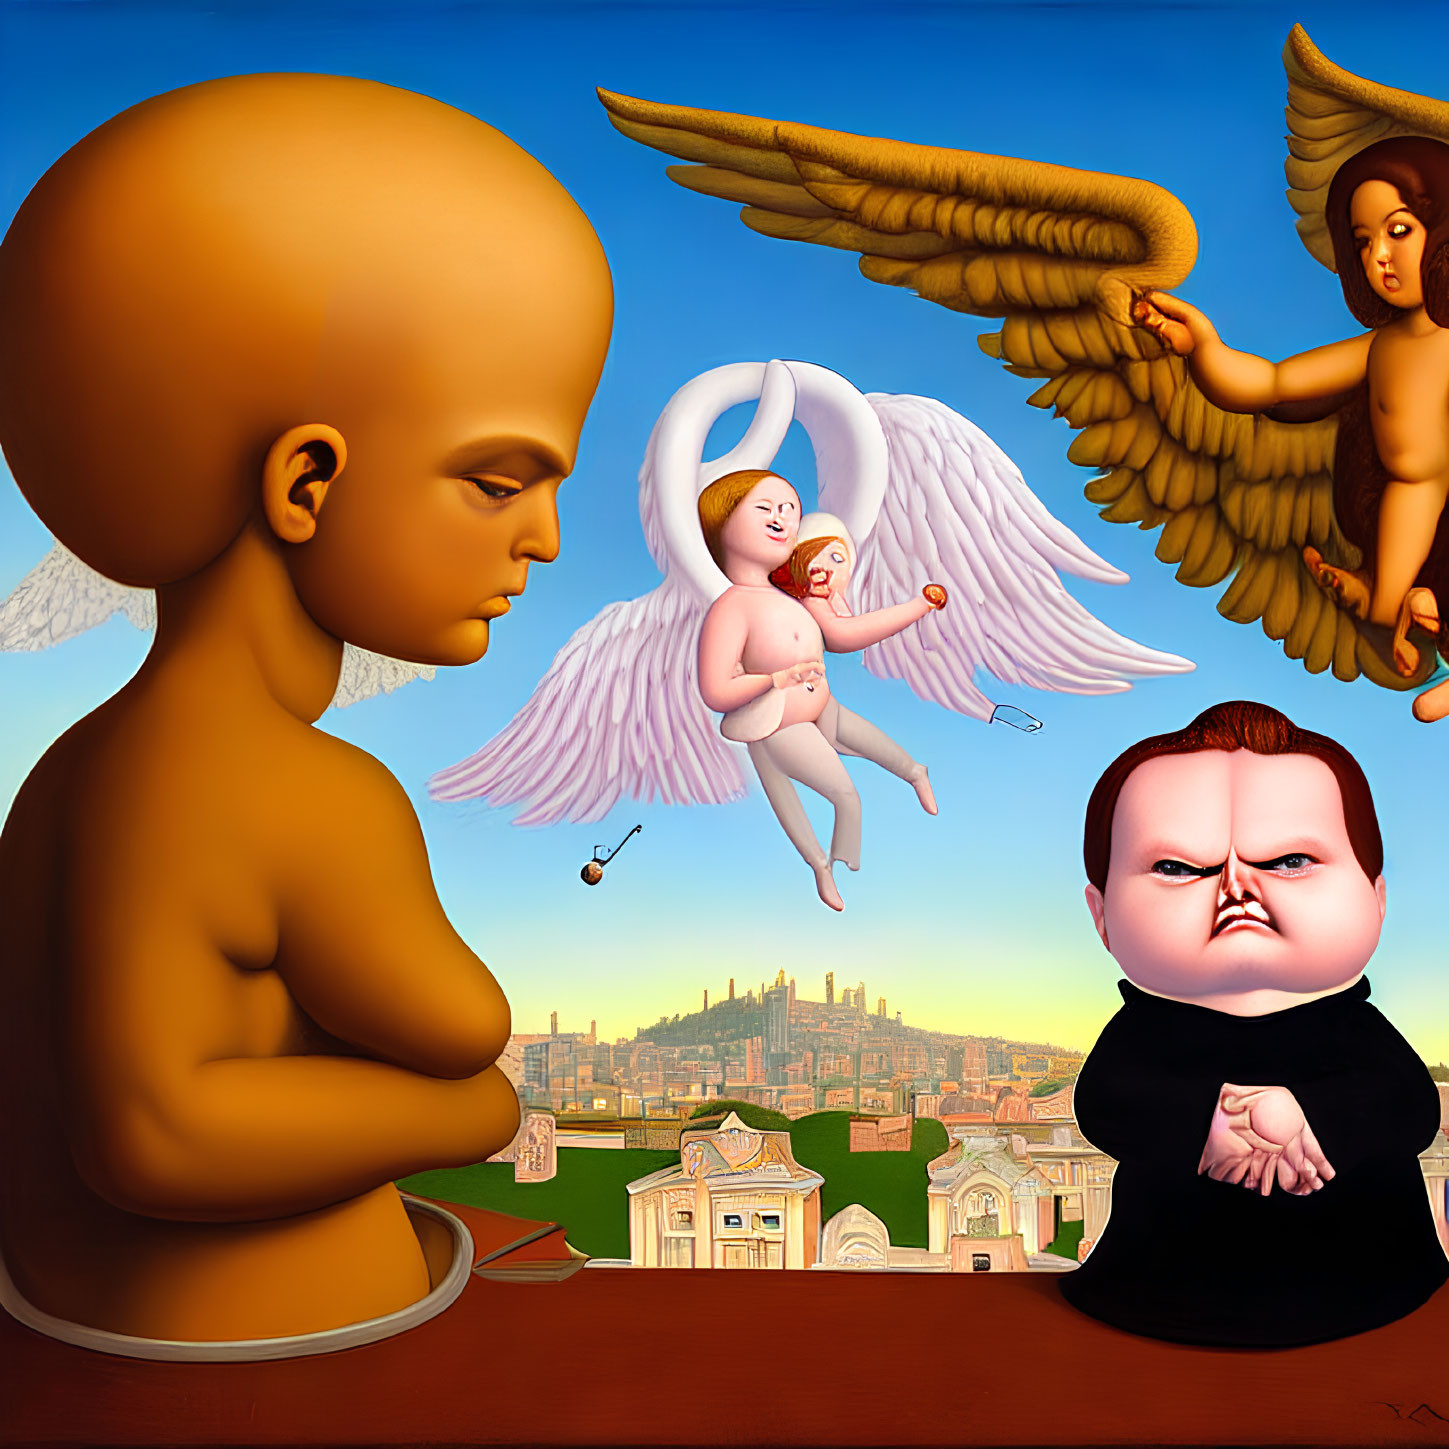 Surreal painting featuring oversized baby head, cherubic figures, angelic wings, cityscape,